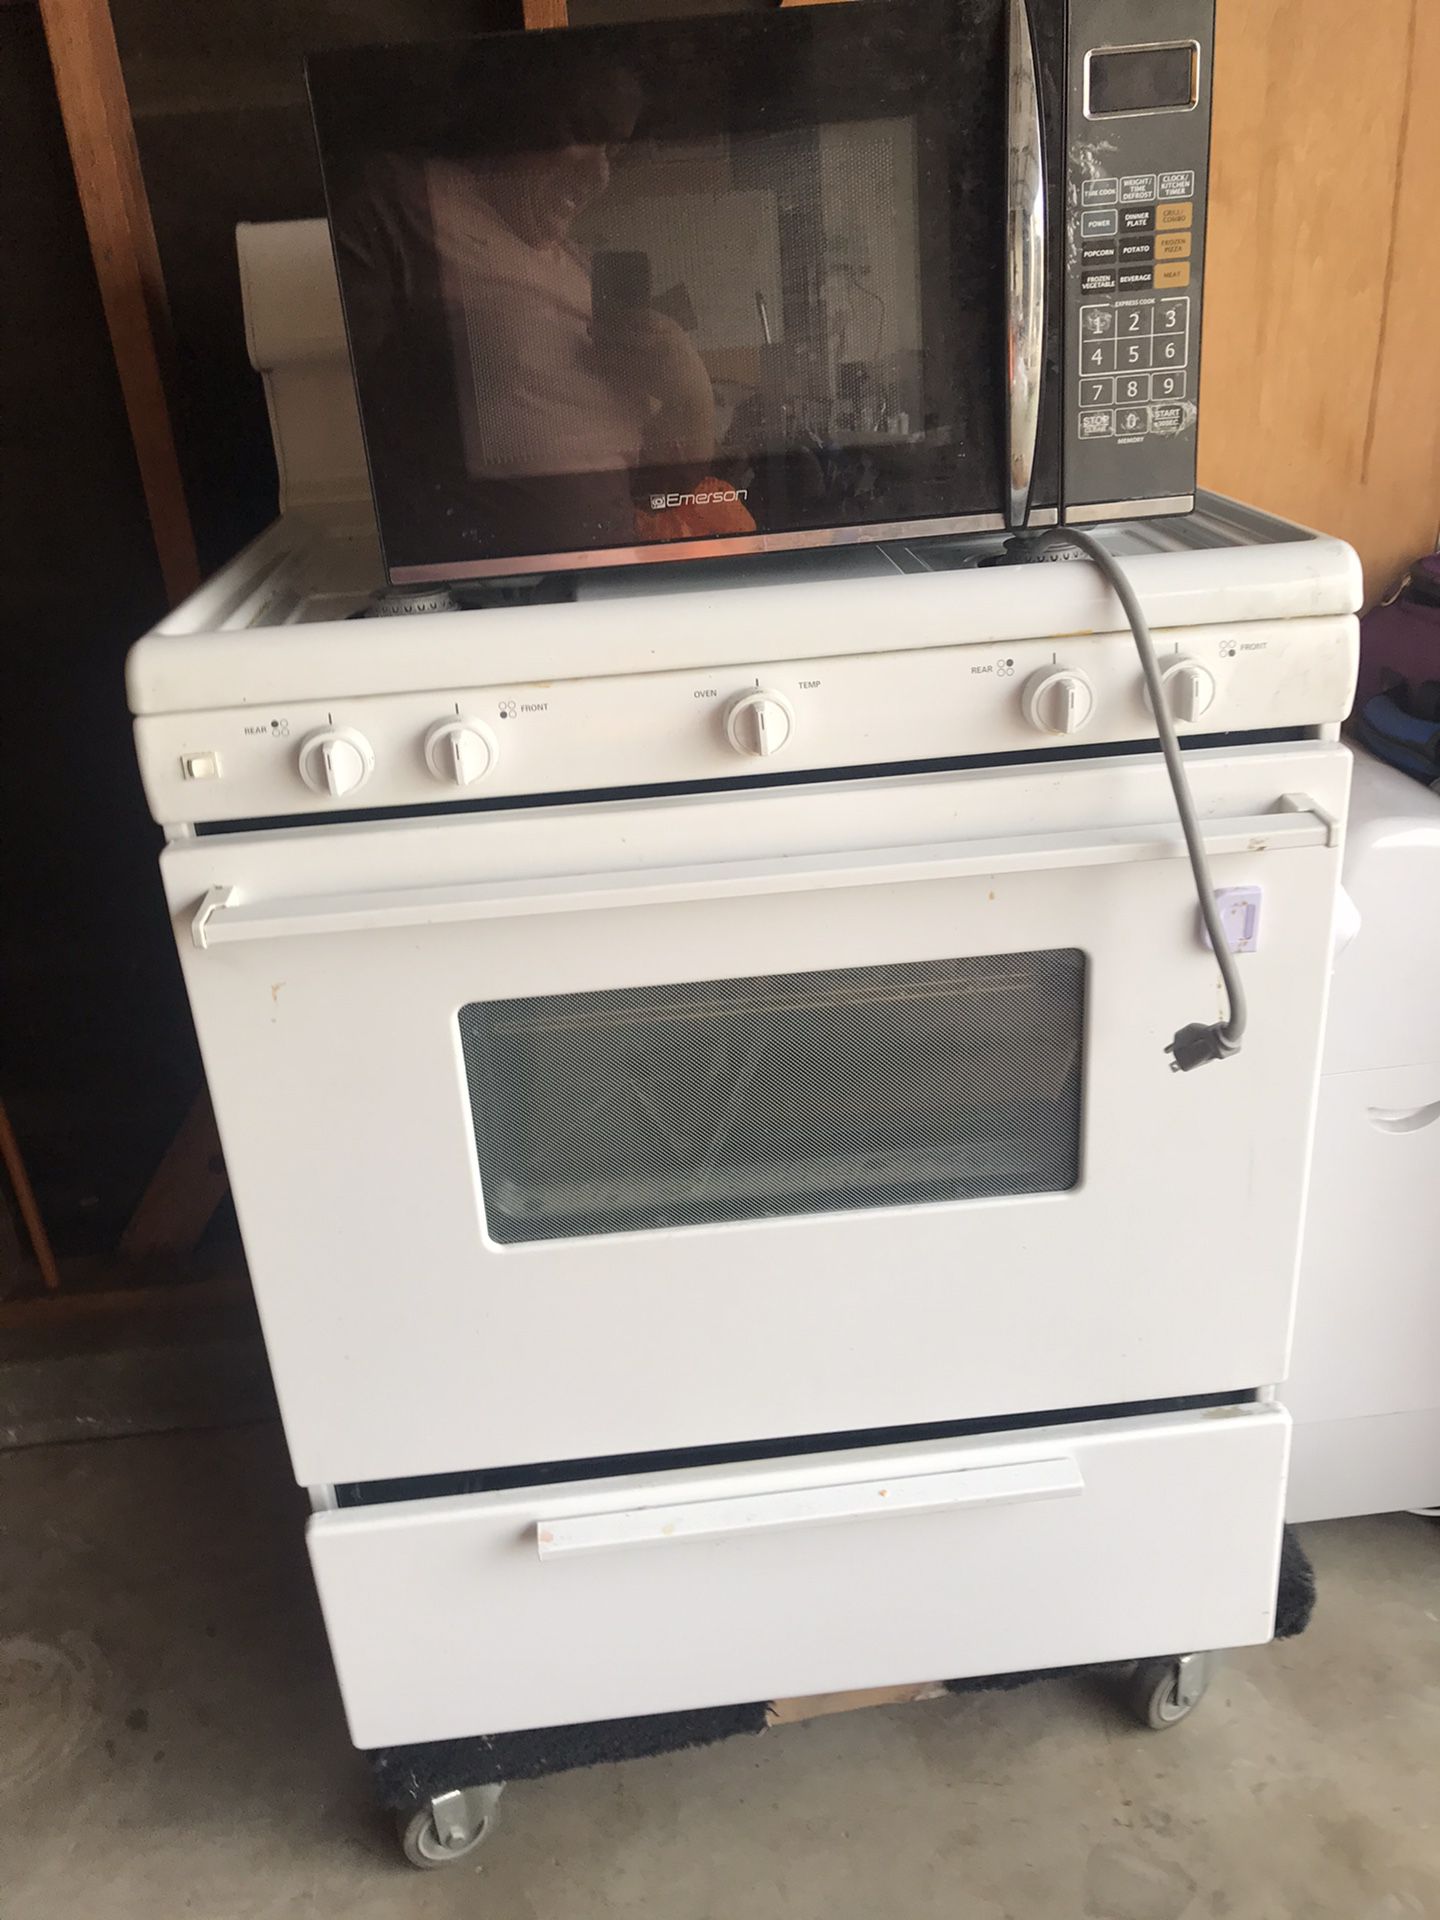 Microwave and gas stove used